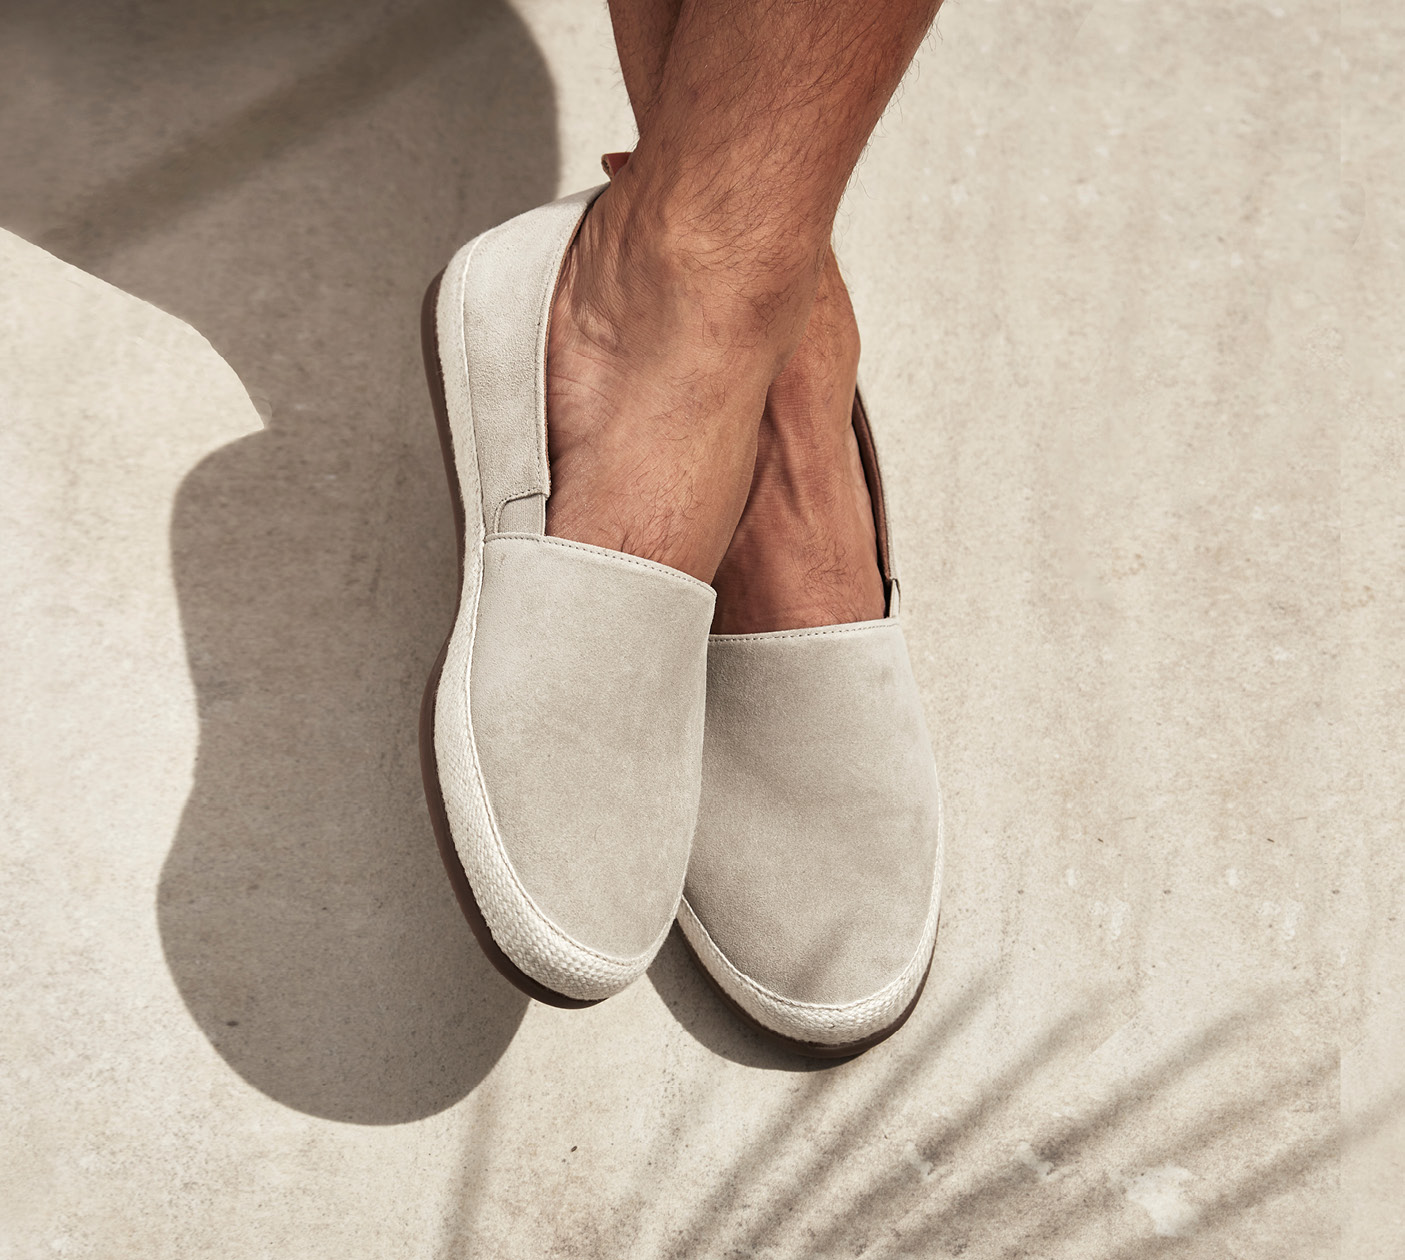 Why Every Man Needs a Pair of Slip-Ons